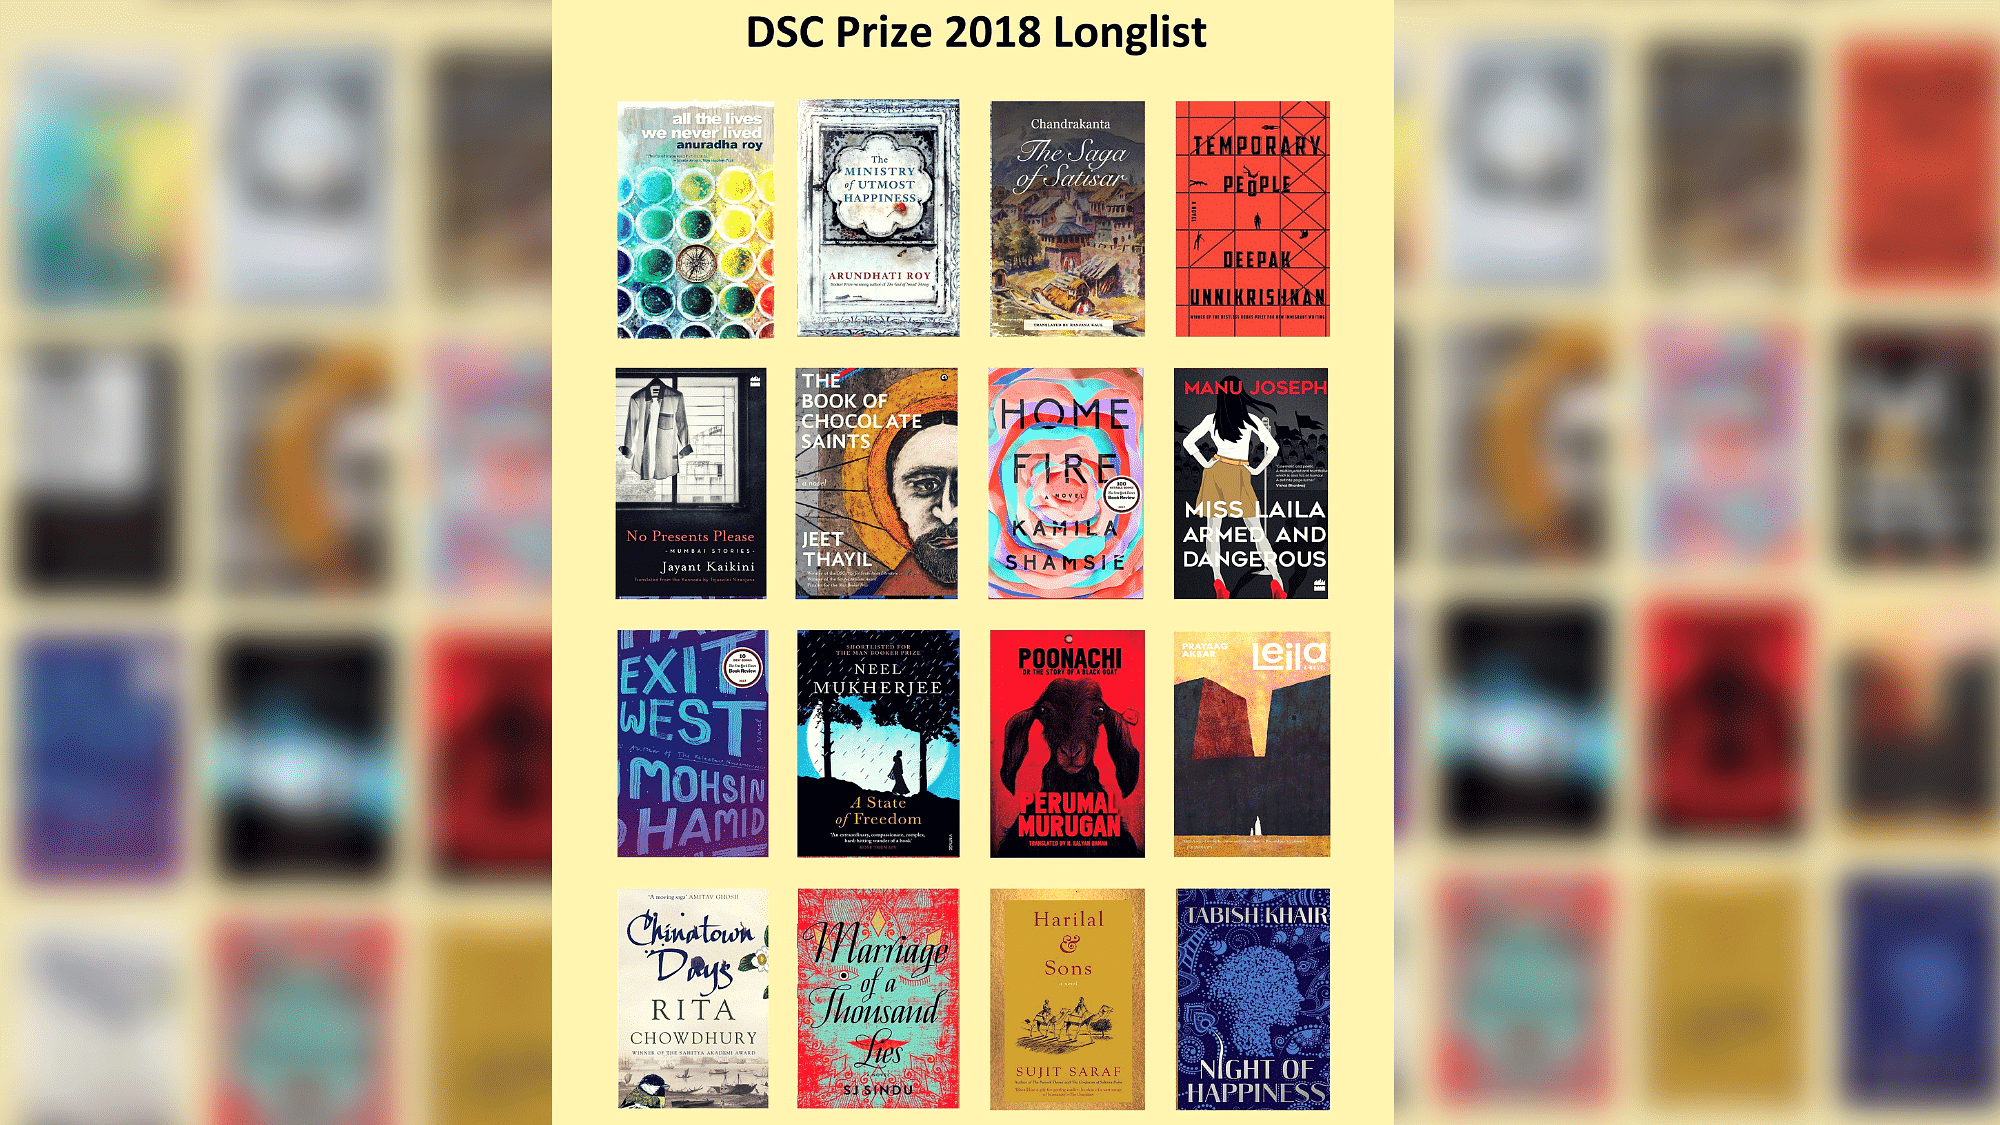 The DSC Prize 2018 Longlist was announced on 10 October.